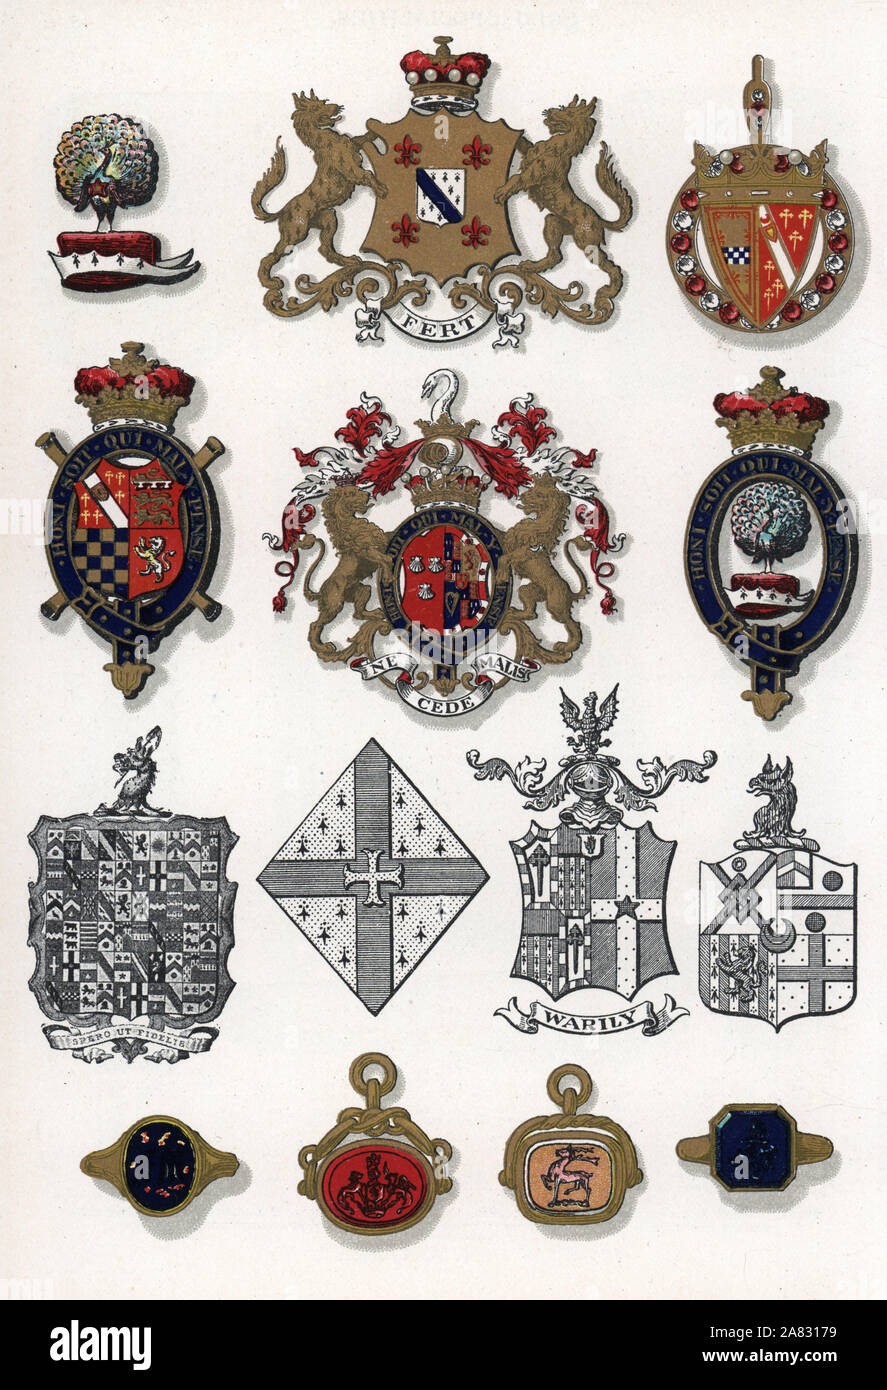 Heraldic crests, rings and brooches in enamel and gold. Chromolithograph from Edwin Streeter's Gems Catalog, Bond Street, London, circa 1895. Stock Photo